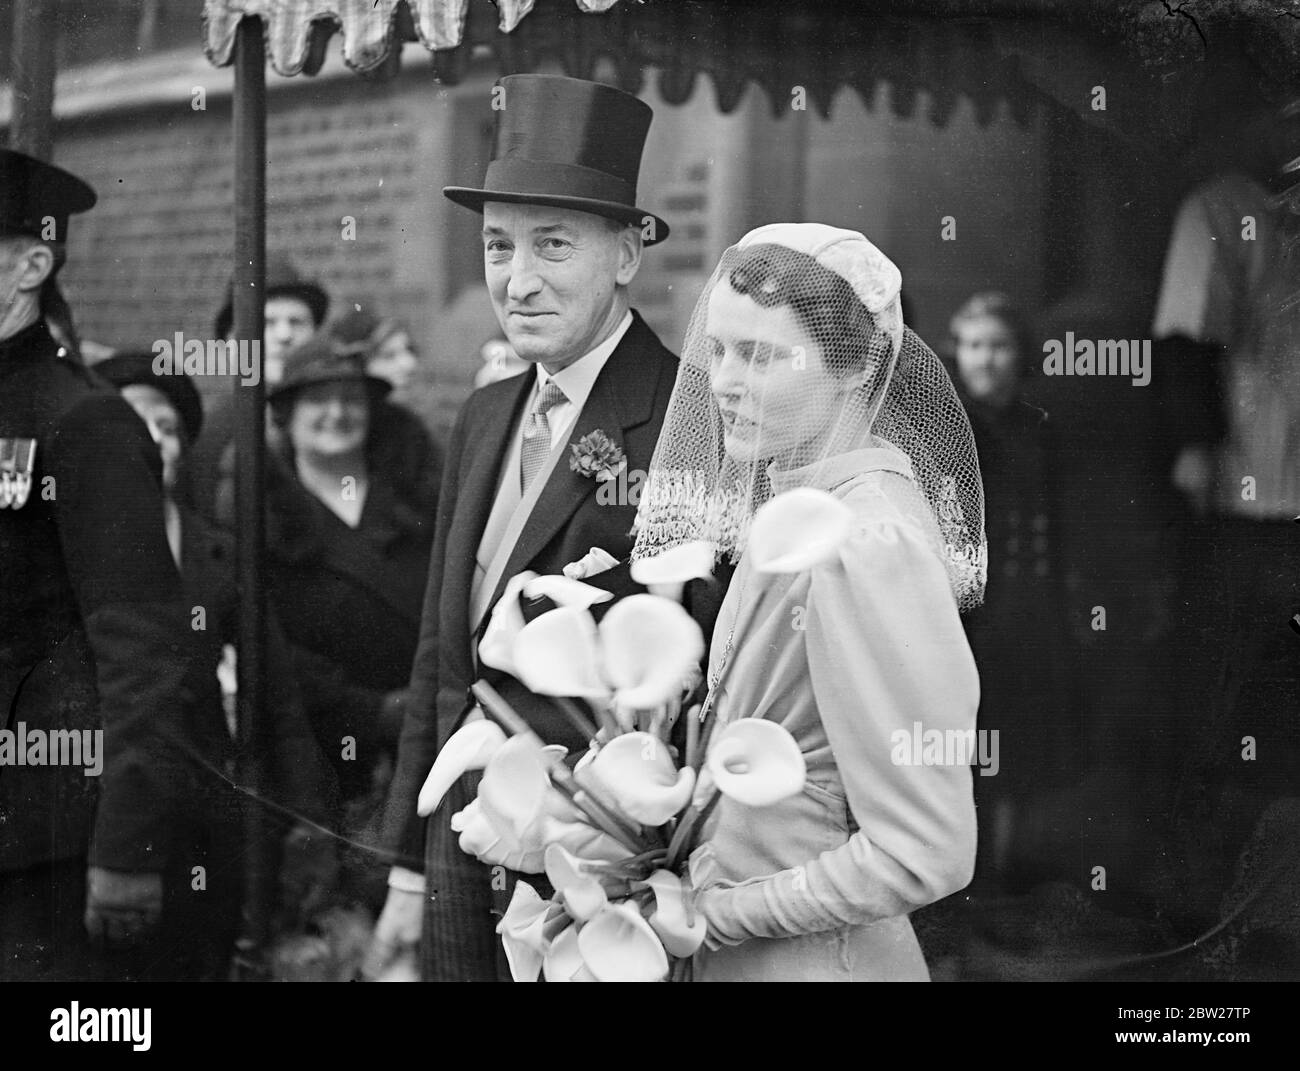 Turf wedding in London, director weds his woman chief. The bride, Miss Constance Dagnall, hid her face with her, bouquet when she left St Mary's Church, Cadogan Street, after her marriage to Maj George Anne. Major Anne is managing director of Tote Investors, Ltd, and is well known in racing circles. Miss Dagnell is chief of his telephone staff. Photo shows, the bride and groom leaving. 22 Janary 1938 Stock Photo